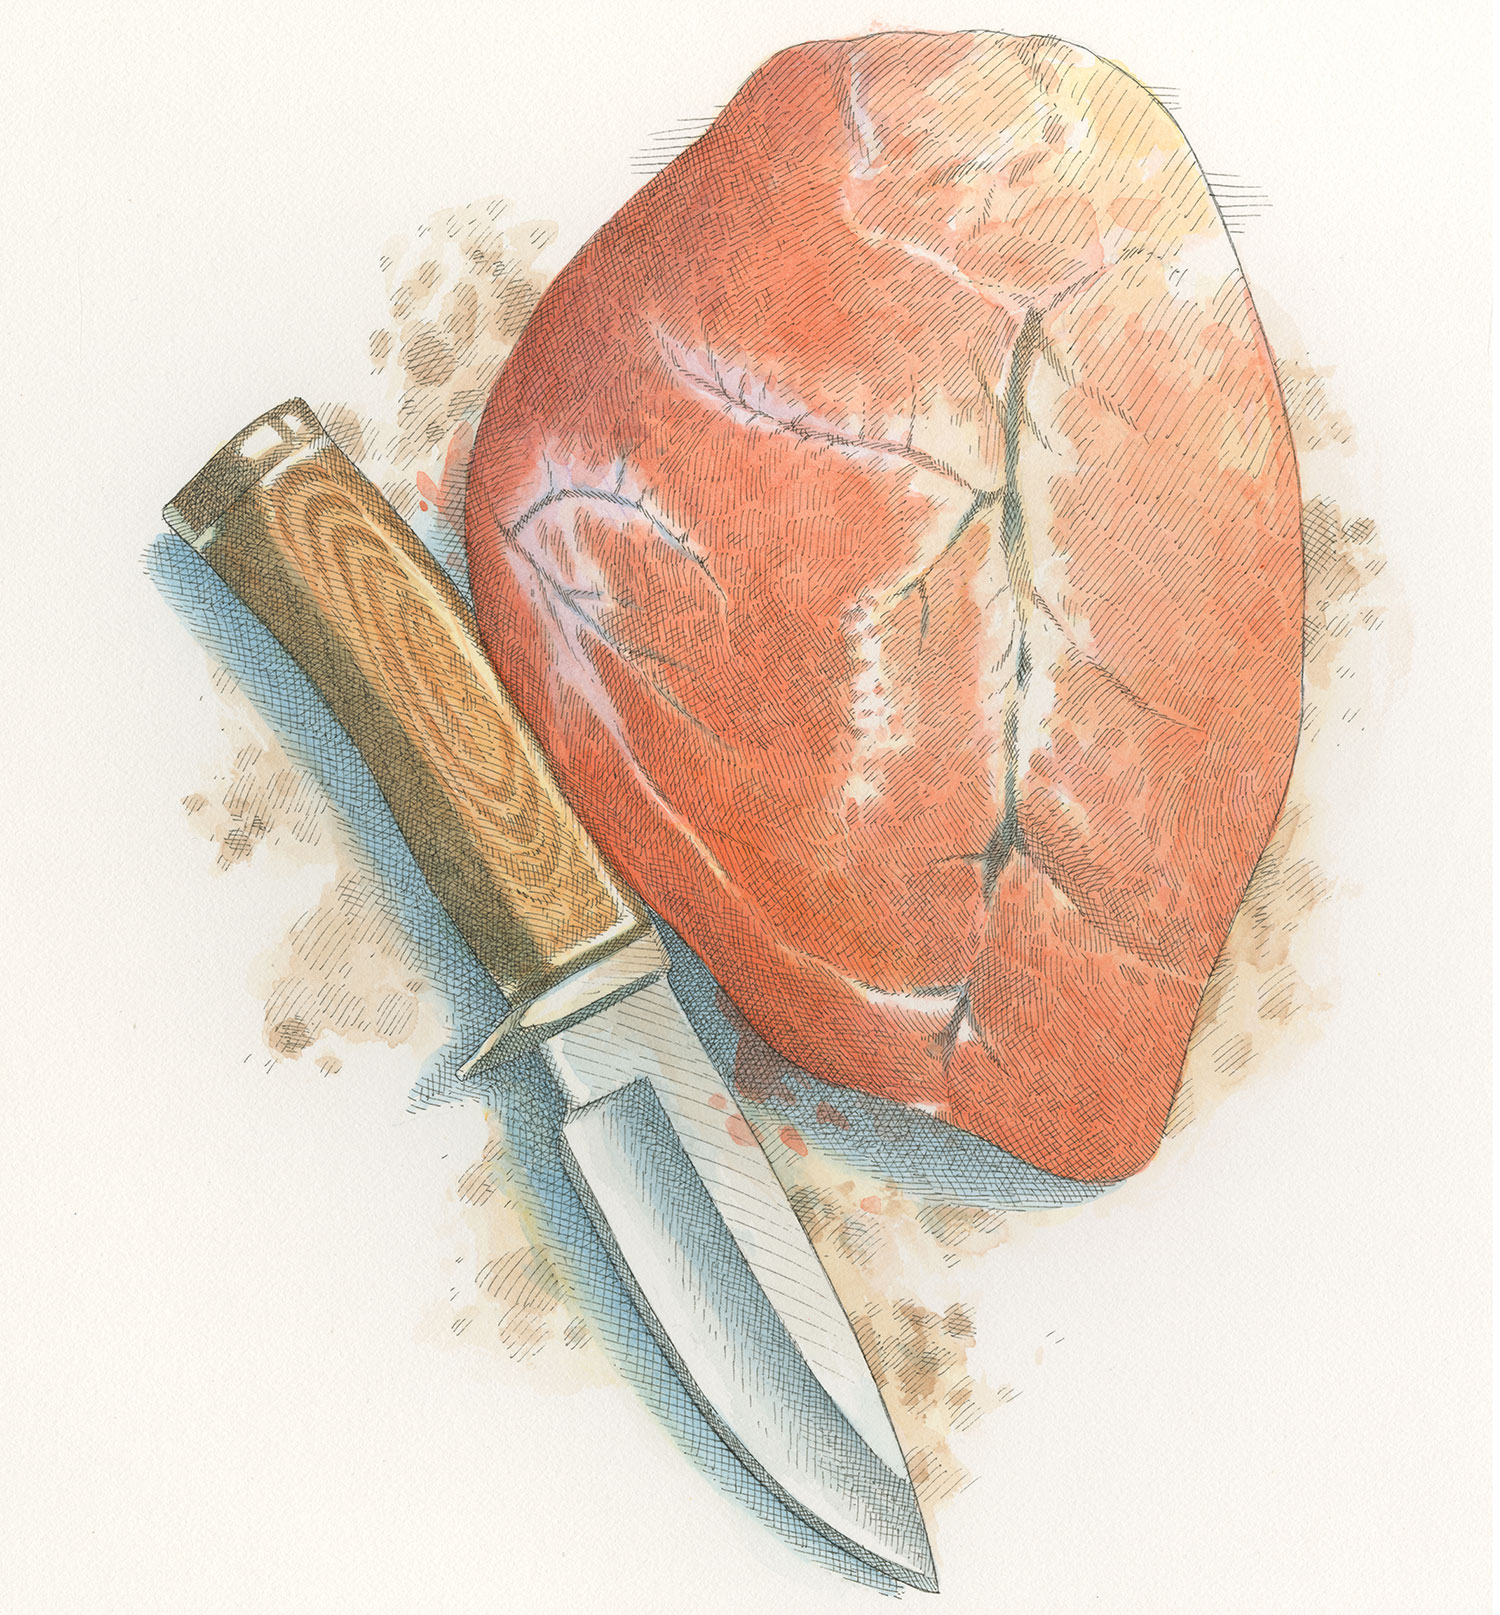 deer heart sits next to knife